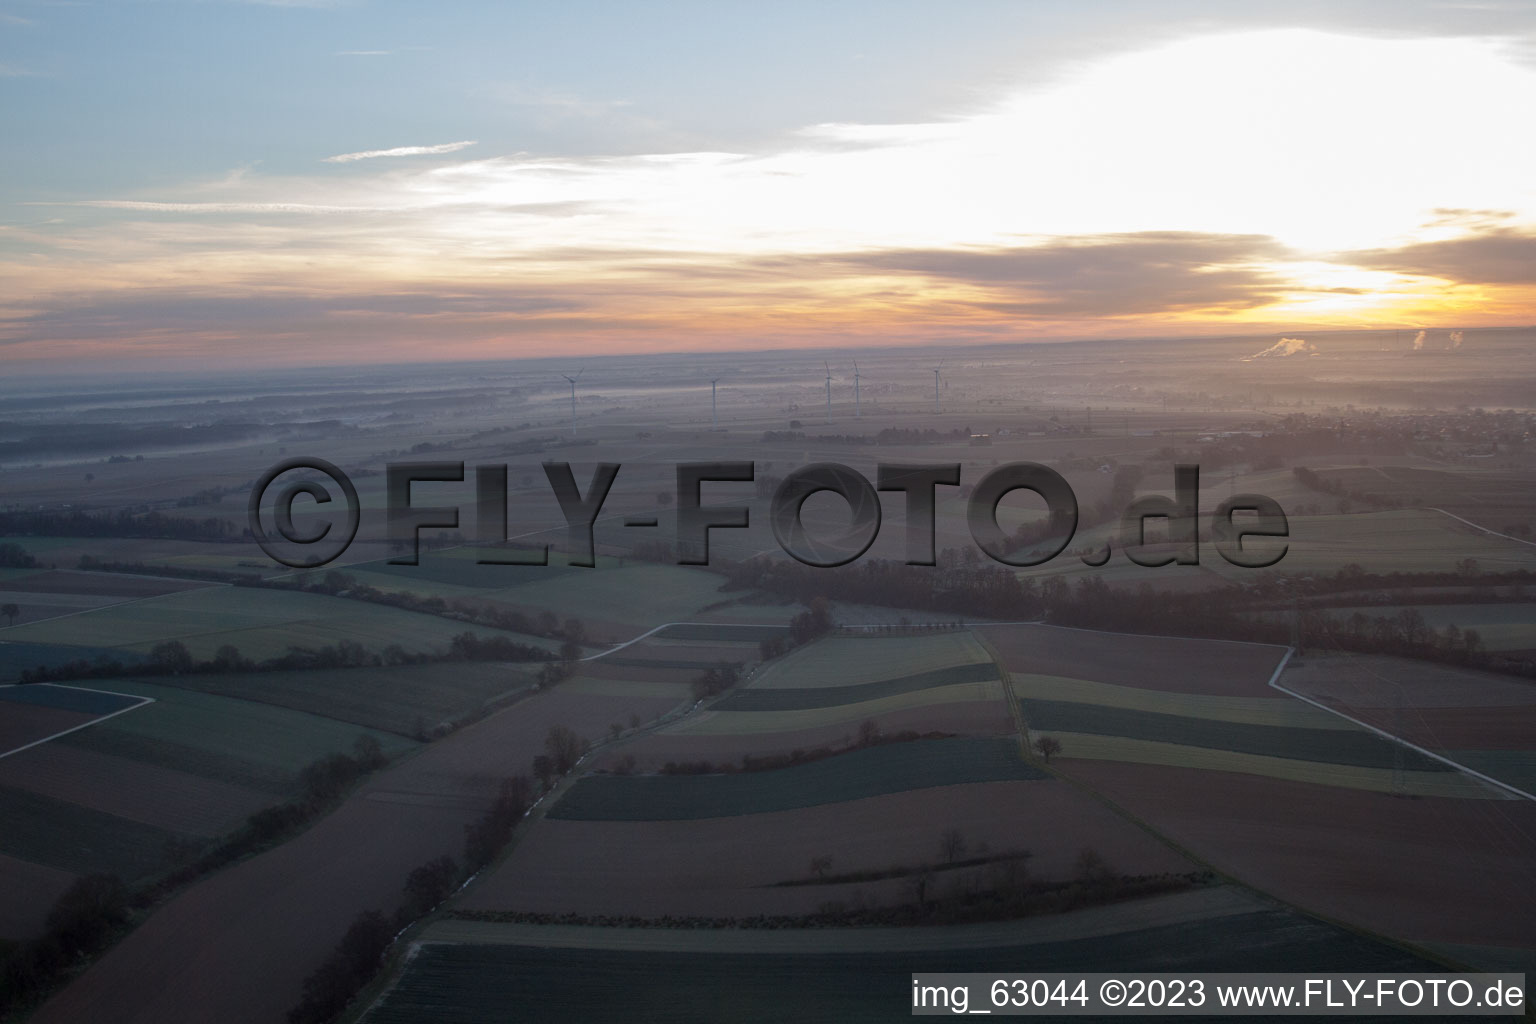 Freckenfeld in the state Rhineland-Palatinate, Germany from the drone perspective